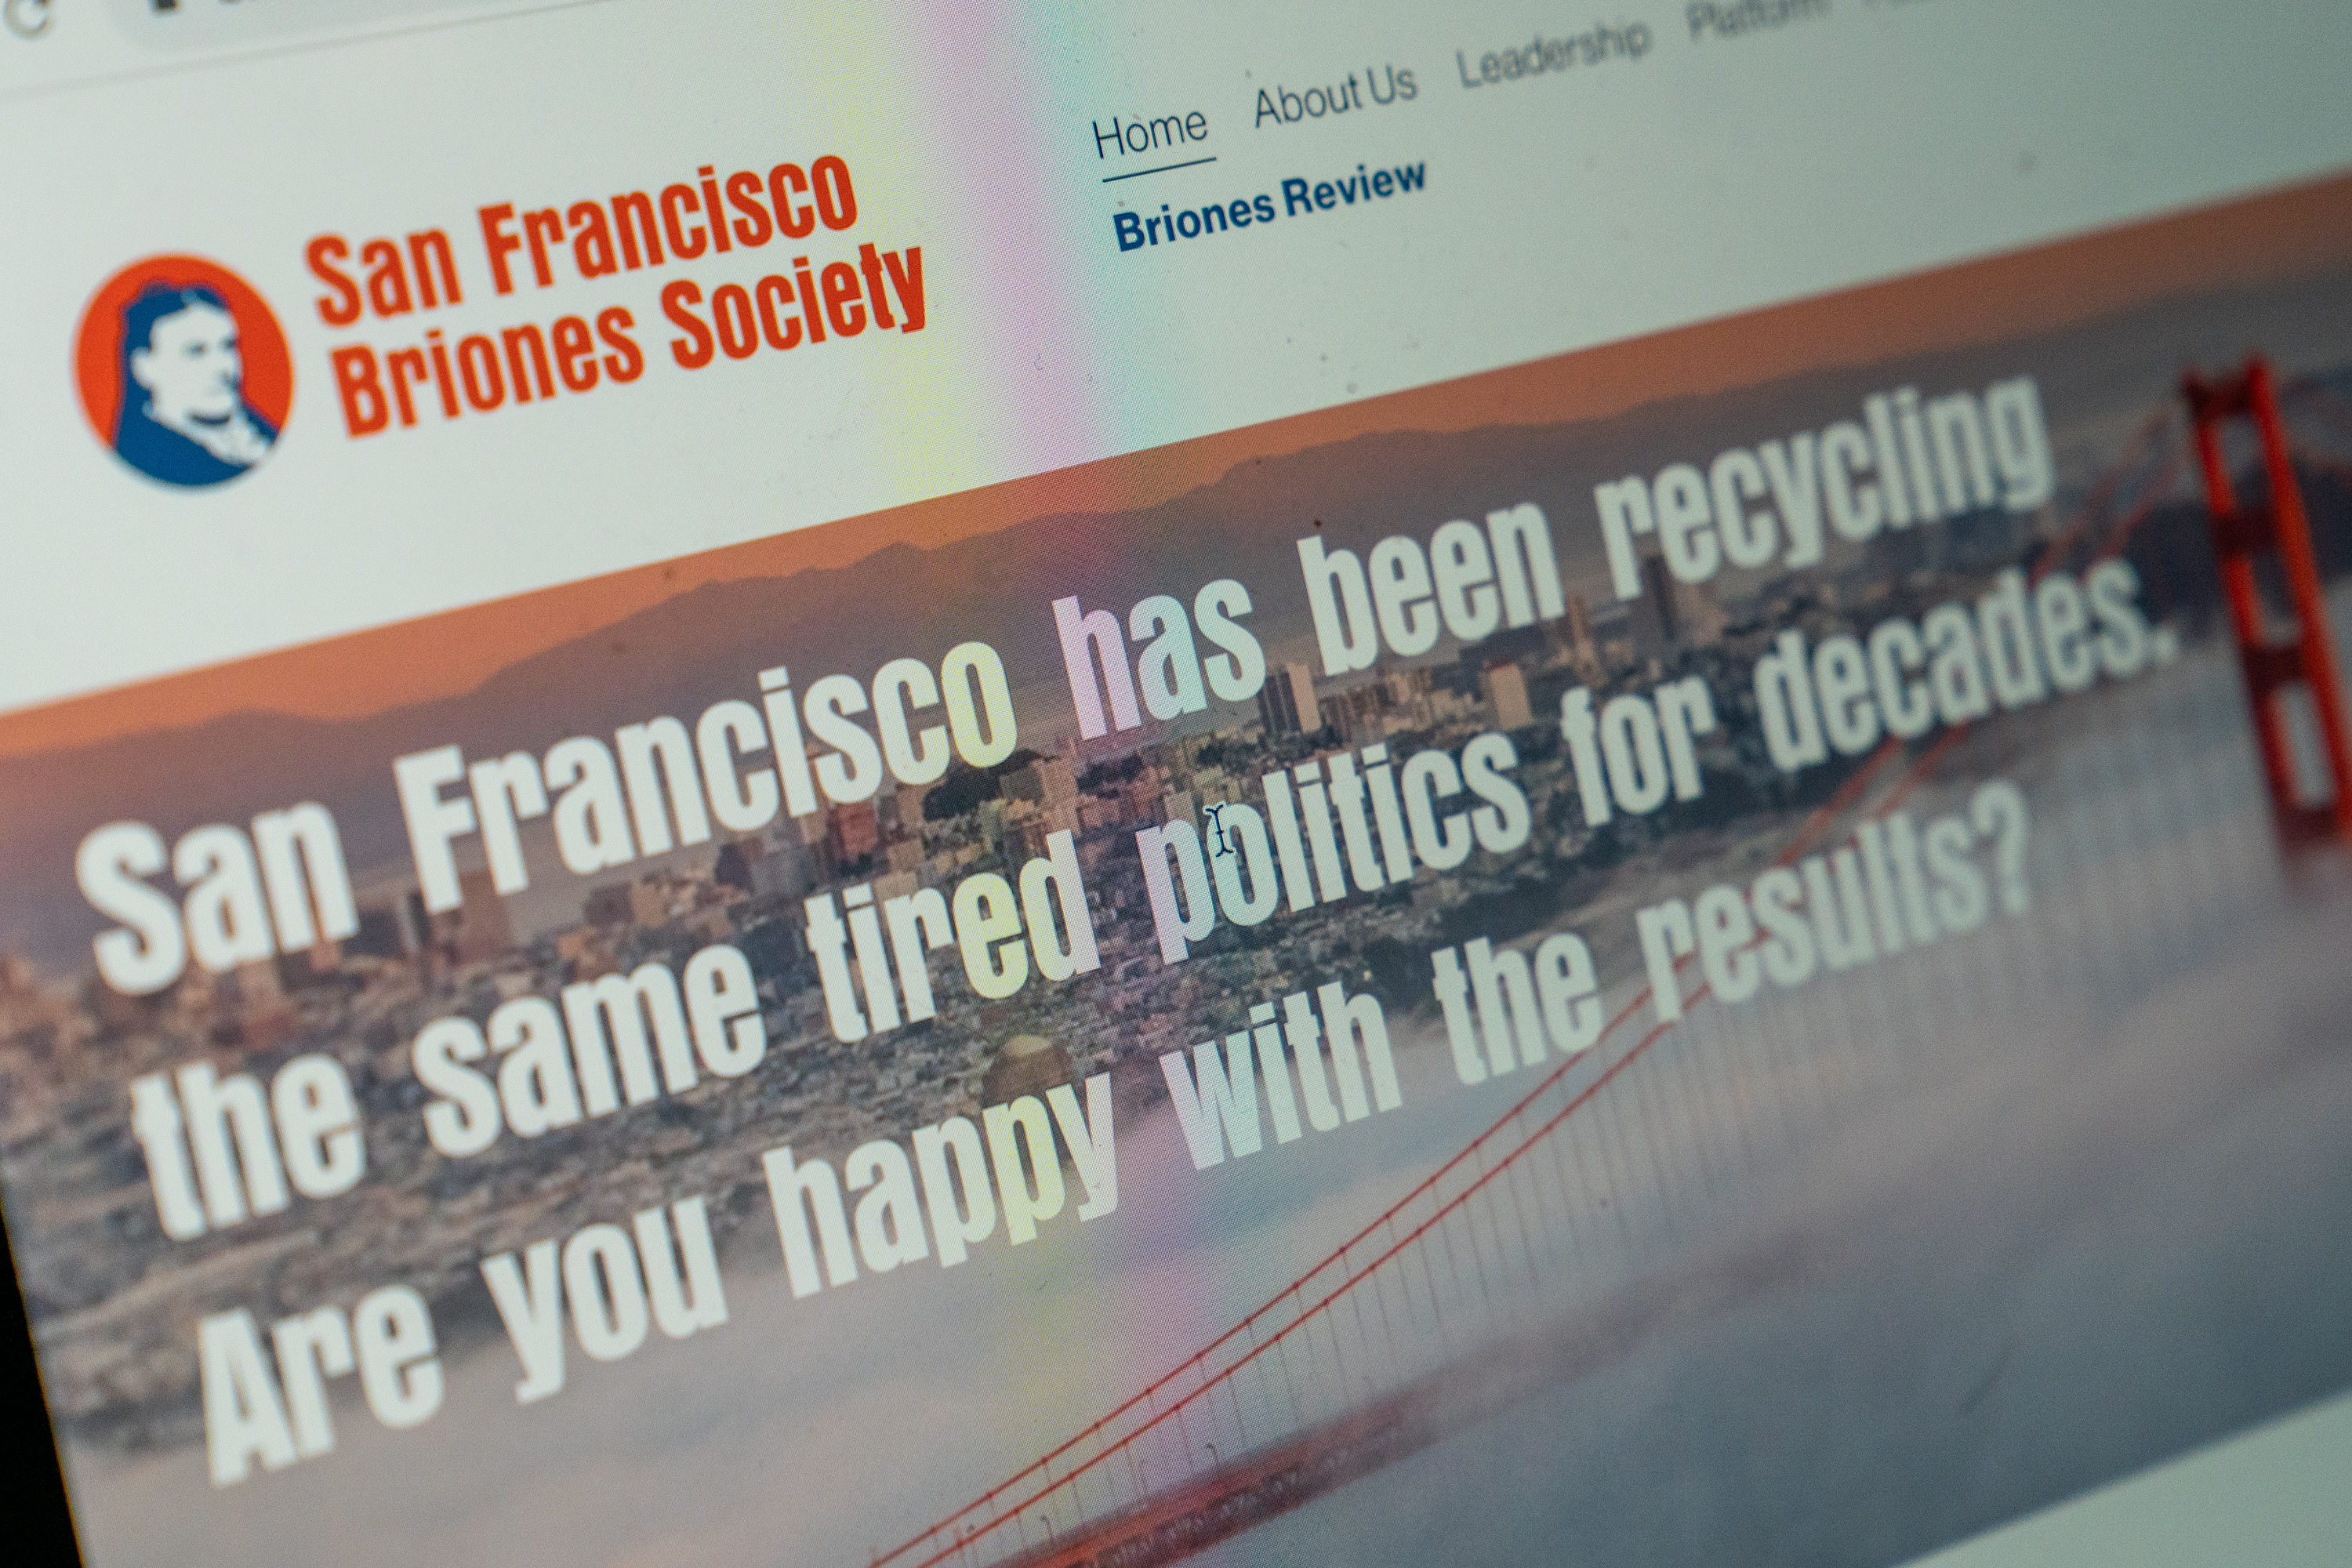 A laptop with the website for San Francisco Brones Society that reads &quot;San Francsico has been recycling the same tired politics for decades. Are. you happy with the Results?